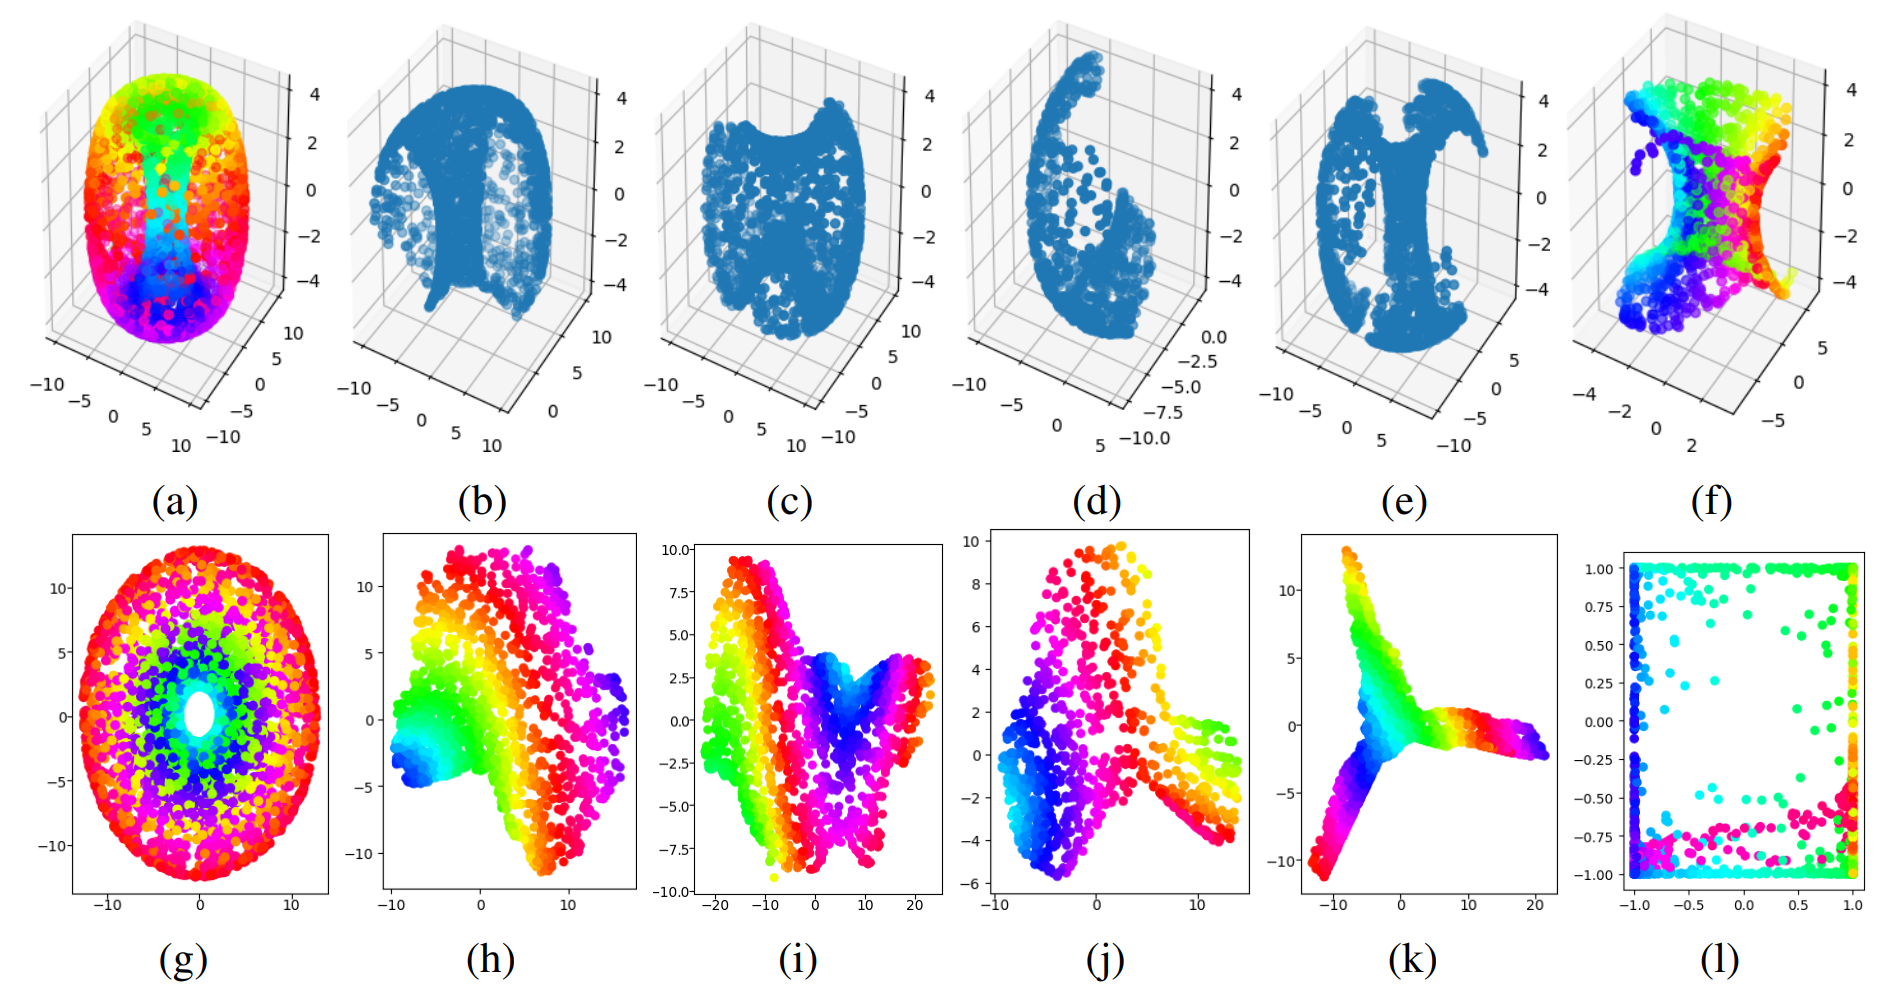 Charts for a torus. (a) and (g) are the torus and ISOMAP embedding respectively, and (h)-(k) are embeddings of (b)-(e). (f) is an atlas created by a different autoencoder, for which its embedding (l) is shown to be inaccurate, as a comparison.